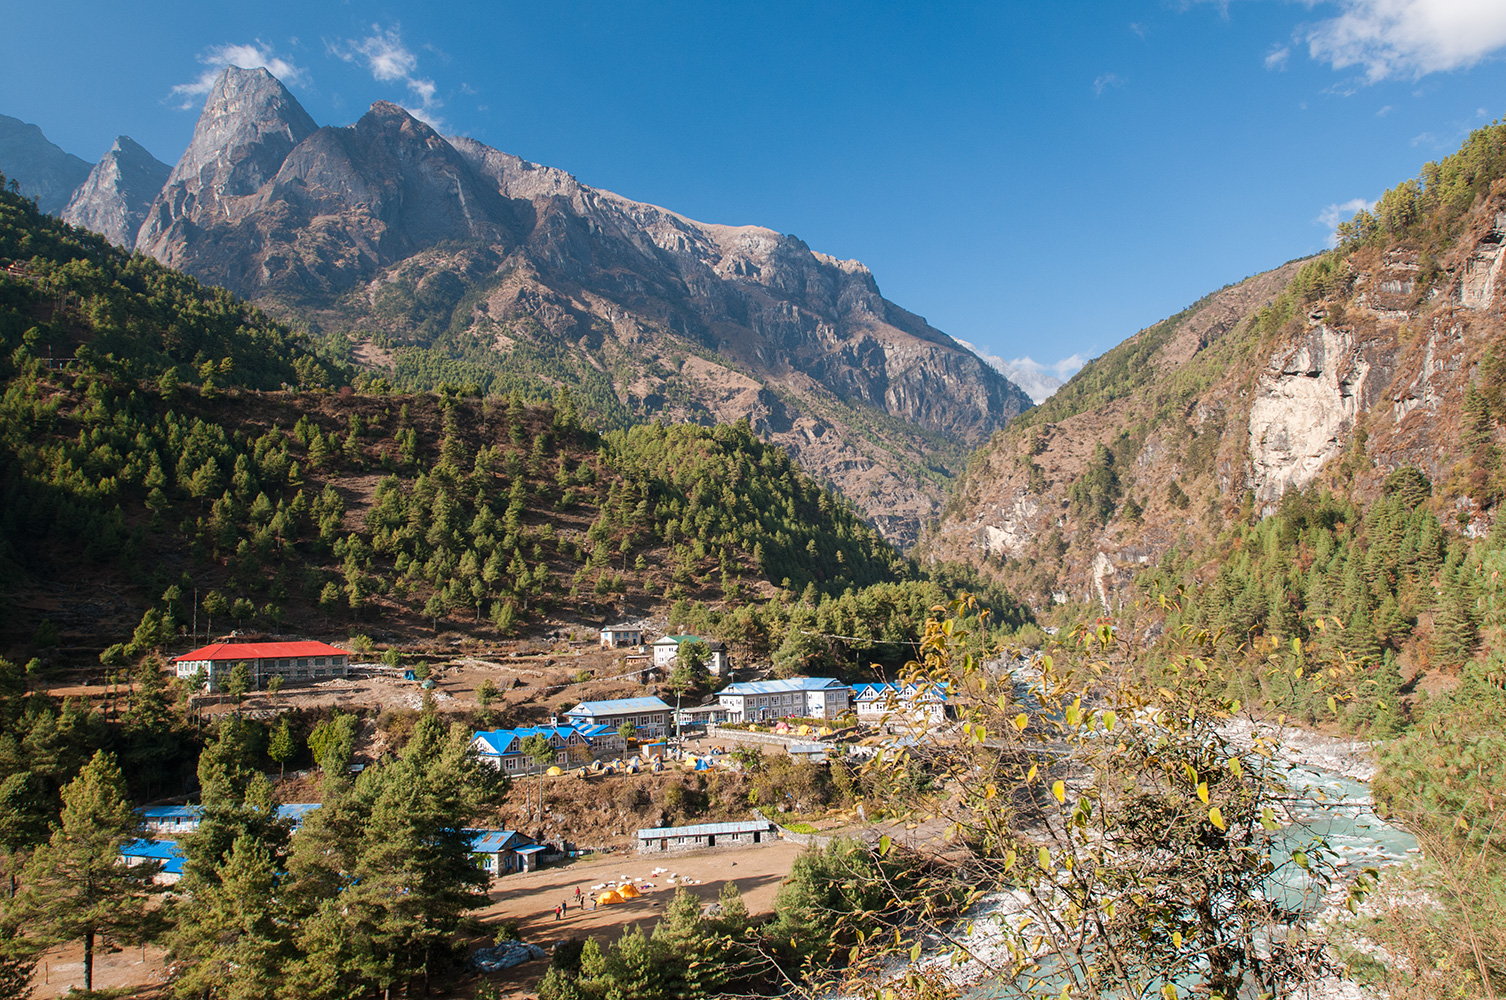 This is the place where the trail from the airstrip at Lukla to Namche Bazaar and Everest crosses the Milke Danda river. These days, during the peak trekking seson, over a hundred flights a day service lukla, and there are thousands of trekkers passing each way every day. Given that most of them will not be carrying their own luggage, but will have either porters or yaks with them, the volume of traffic on the trail can be imagined. It is a circus. Waits of several hours are not uncommon here, as one-way traffic streams across the narrow suspension bridge over the river. Consequently many tea shops and lodges have sprung up...Nikon D300, 17-35mm. November 2008